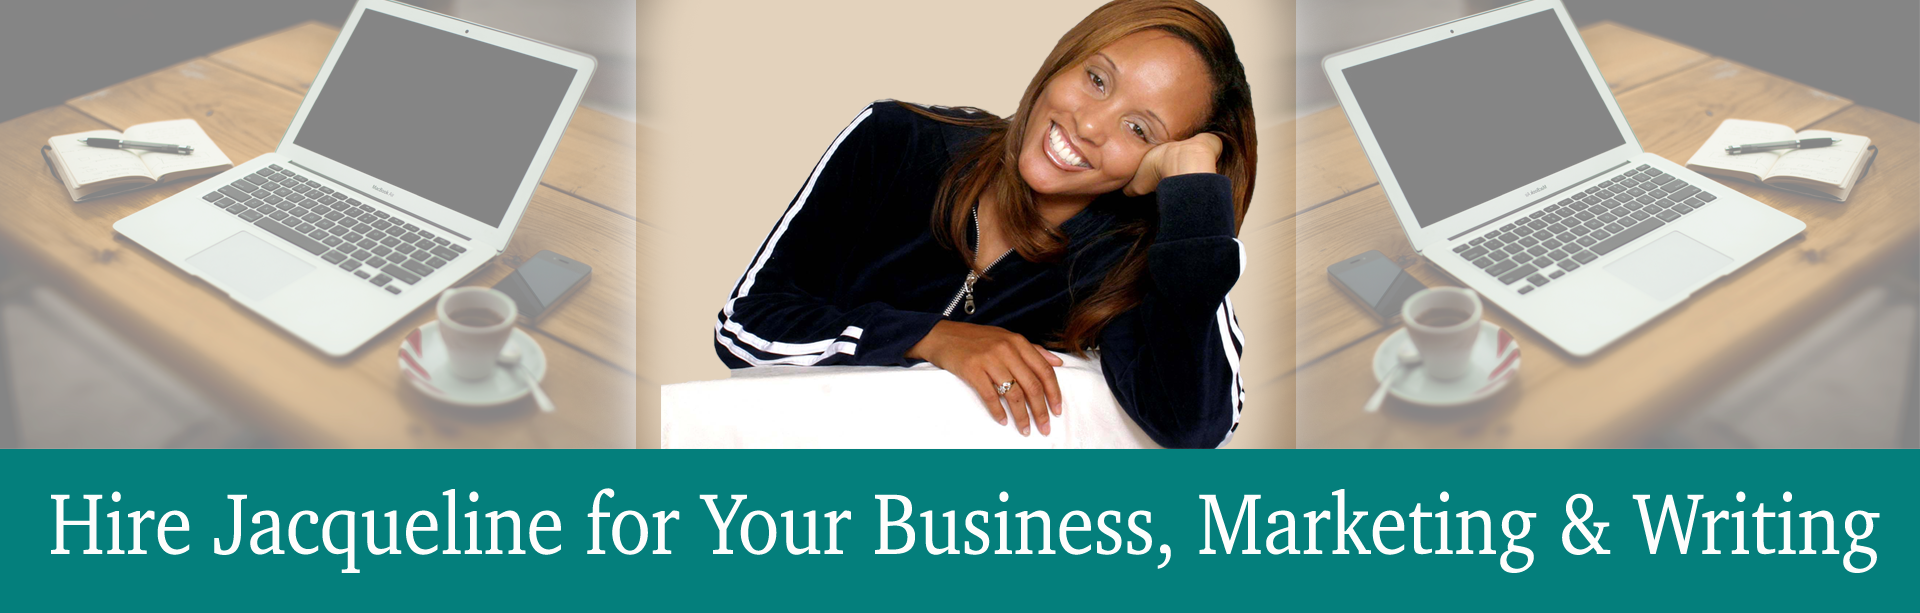 Hire Jacqueline T. Hill For Your Business